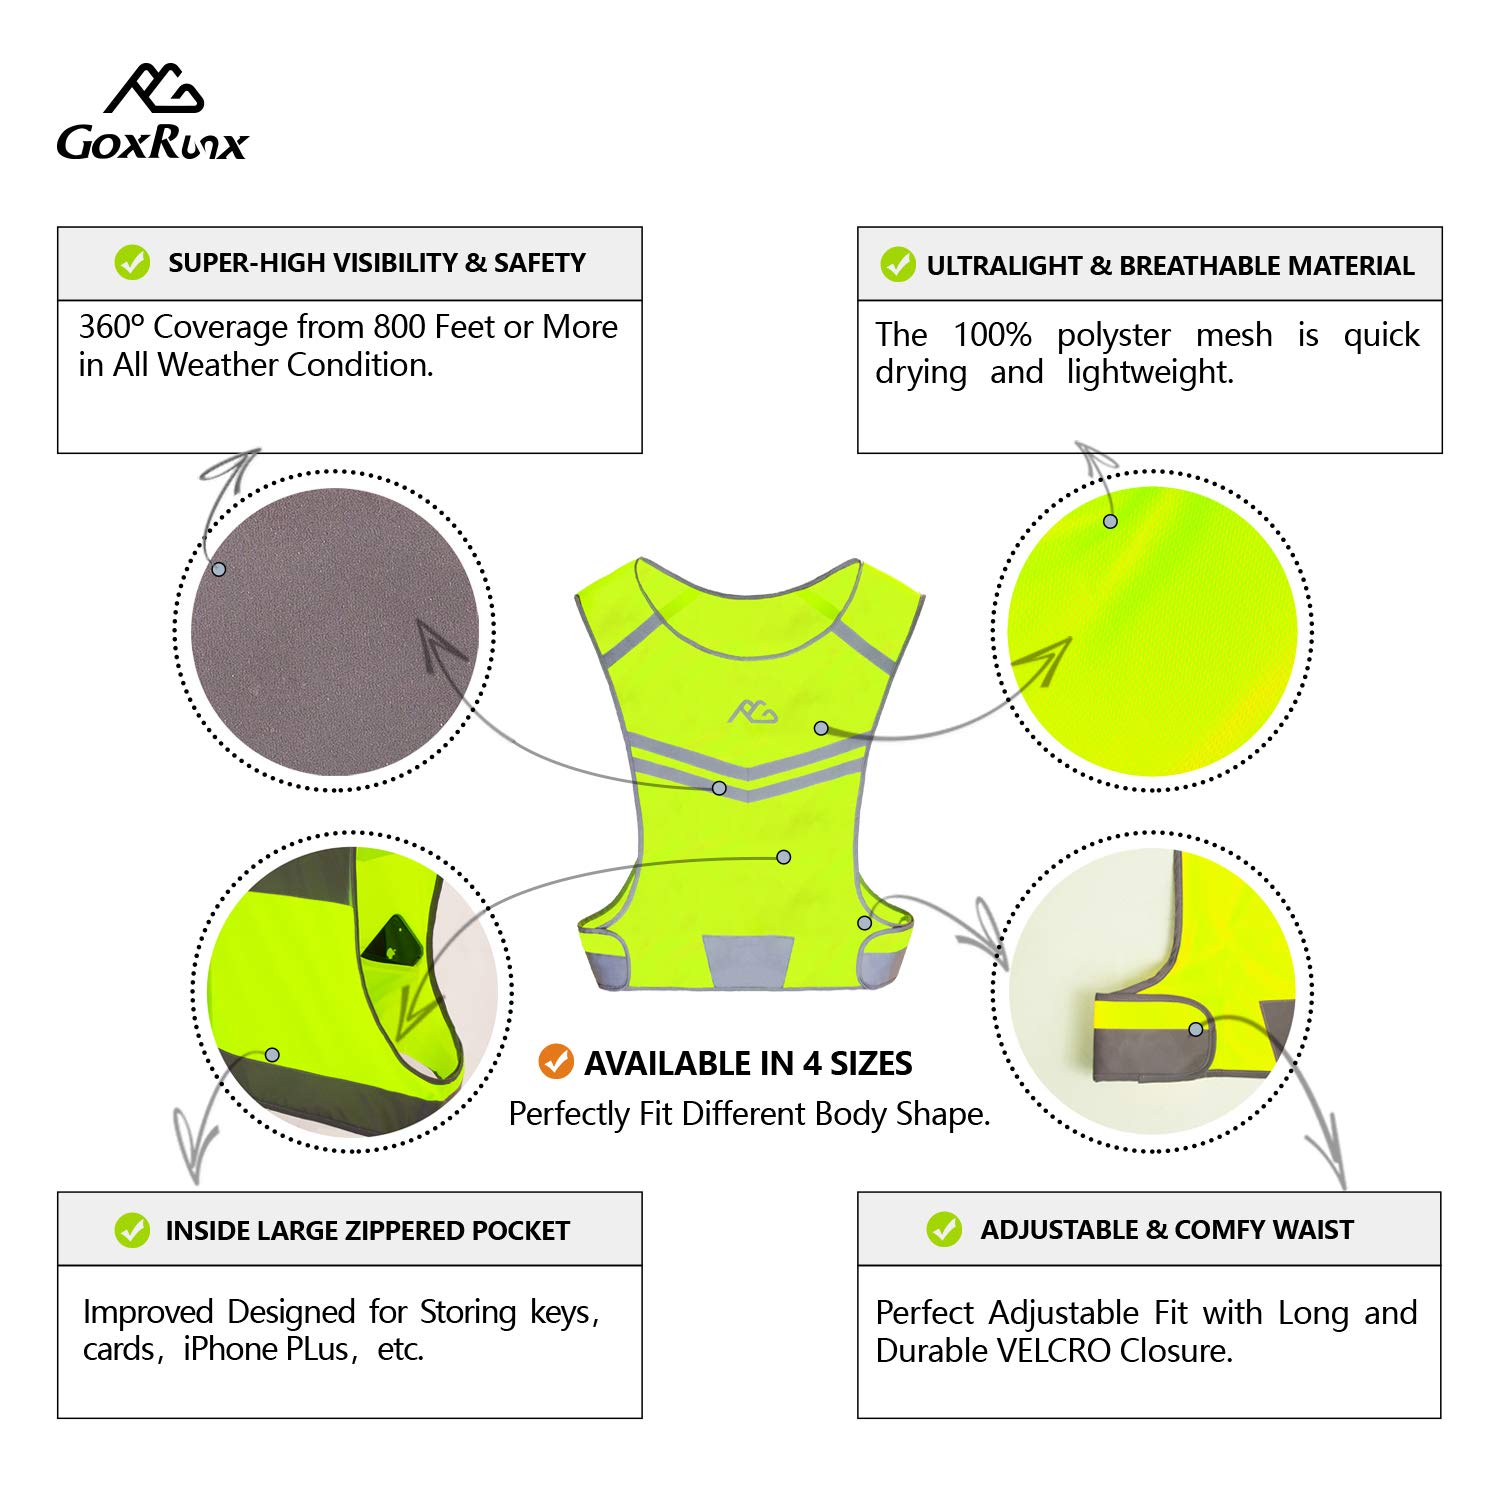 GoxRunx Reflective Running Vest Gear Cycling Motorcycle Reflective Vest,High Visibility Night Running Safety Vest